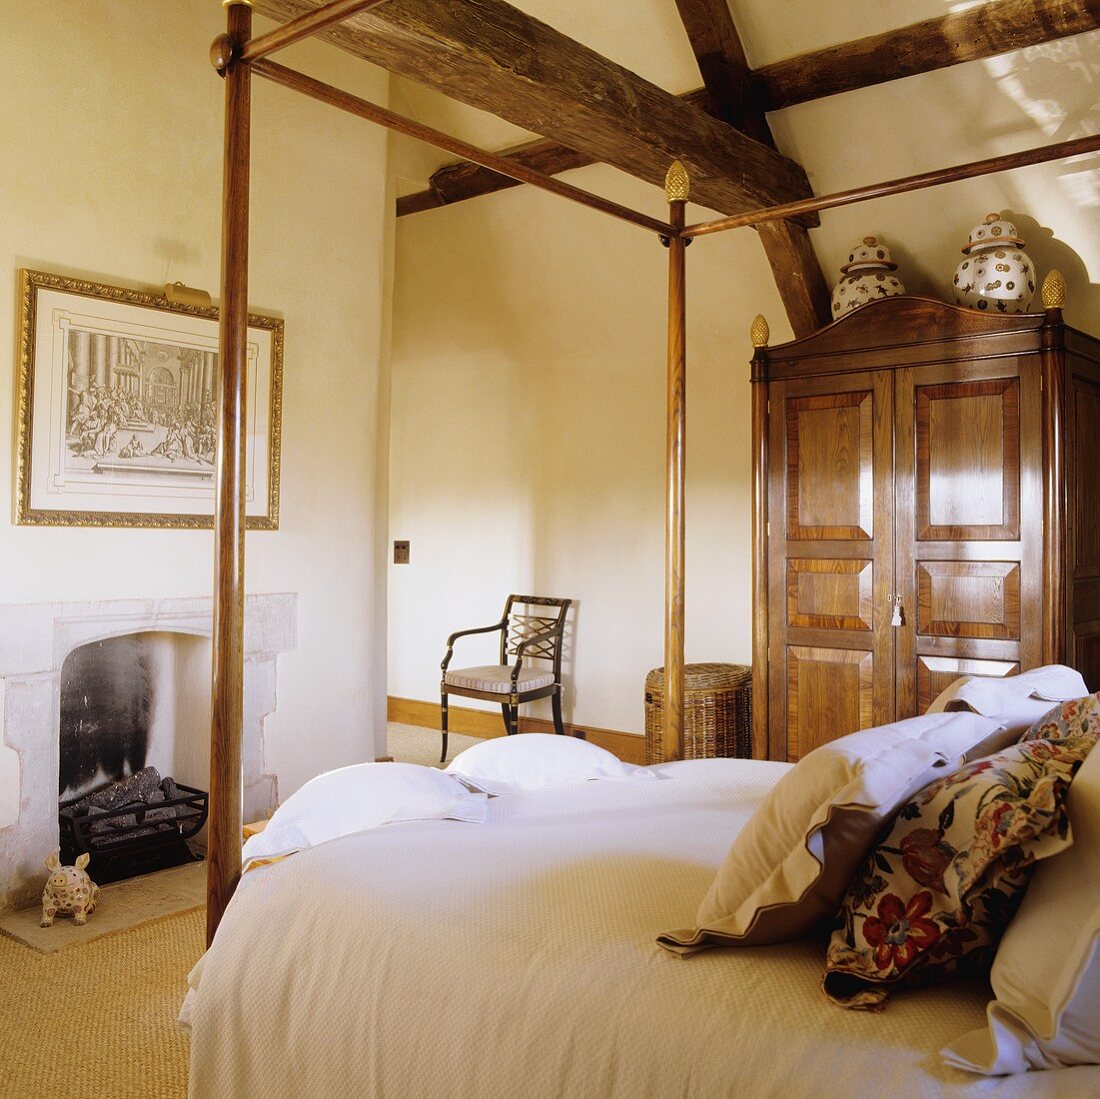 A wooden four-poster bed and an antique wardrobe in a country house-style bedroom under a rustic wooden construction